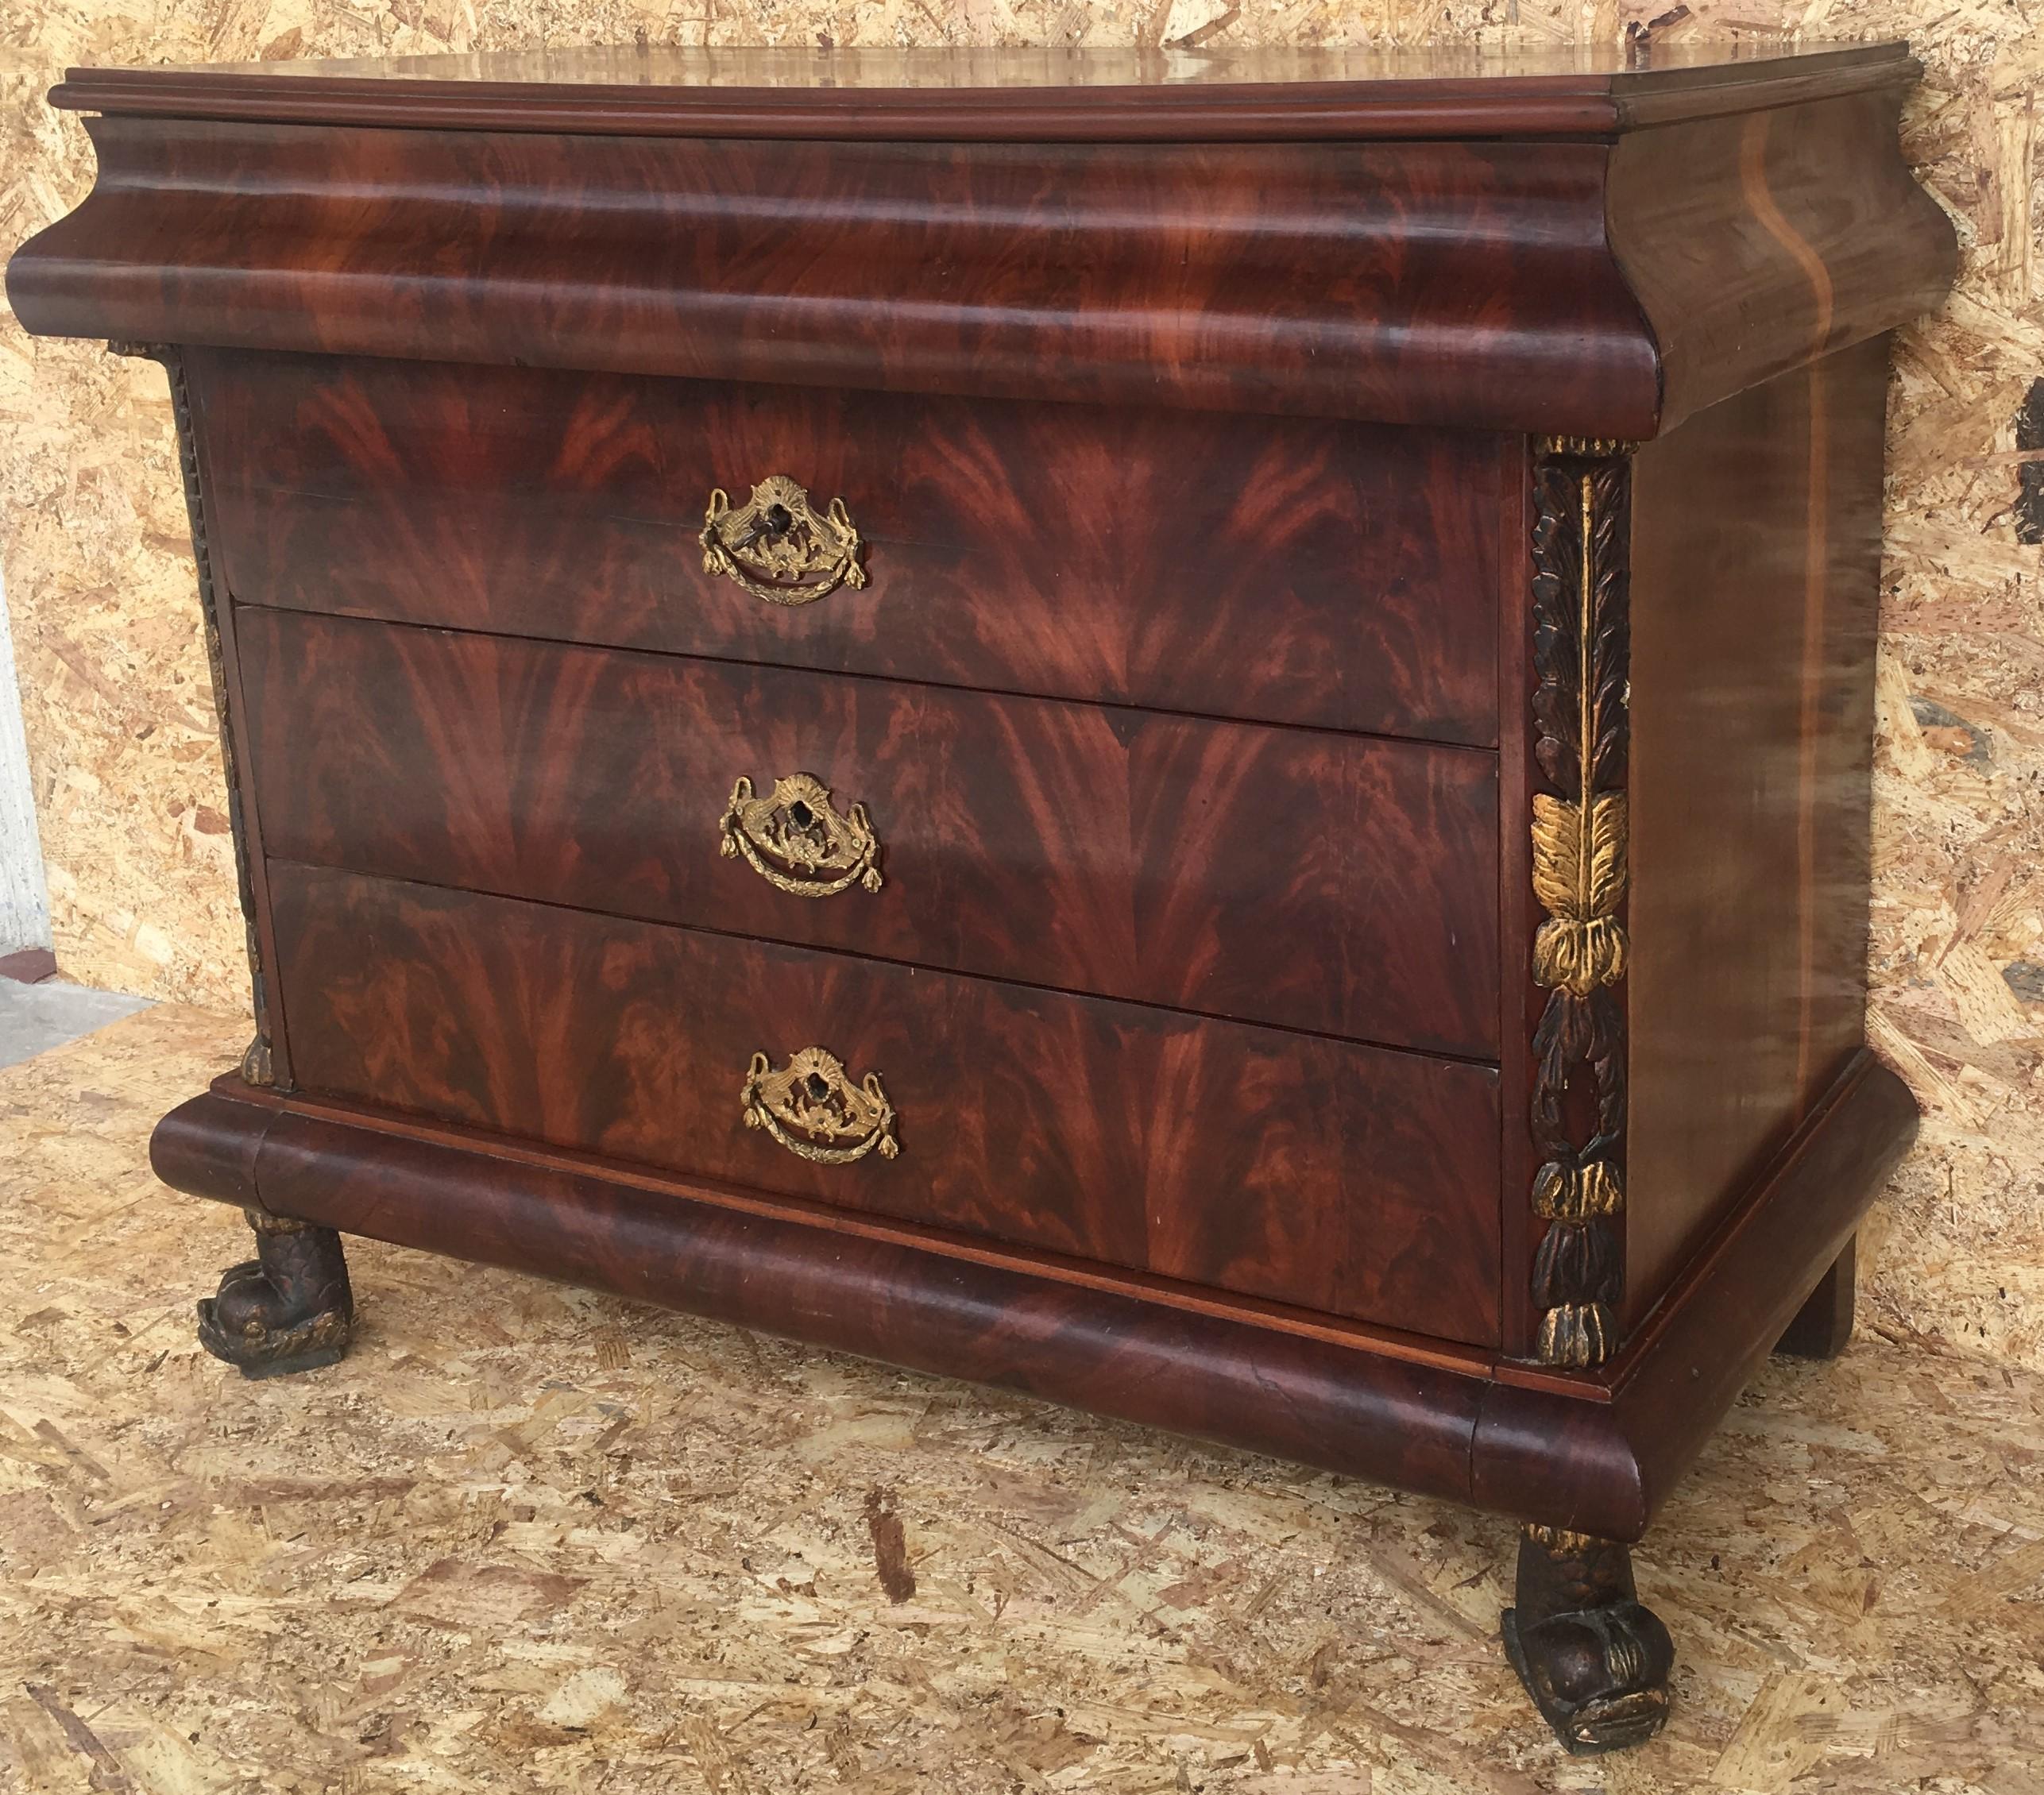 19th Century 1830s French Empire Mahogany Chest with Four Drawers and Gilded Edges, Commode For Sale